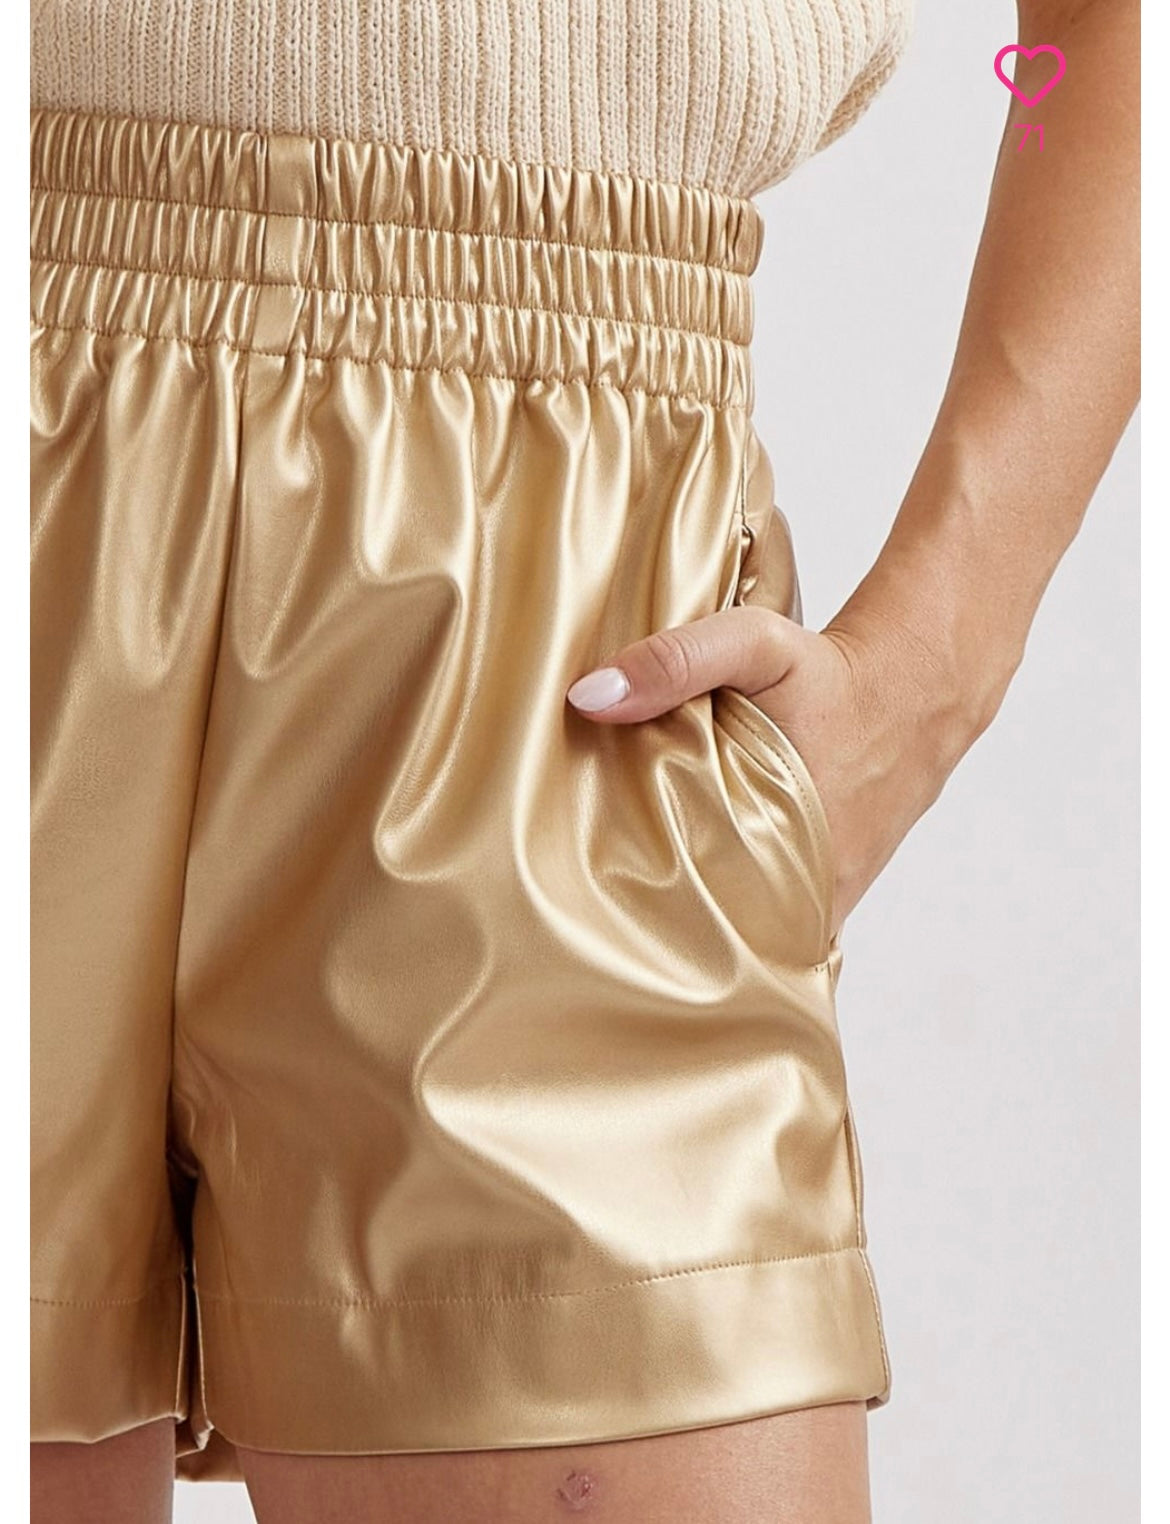 Gold Mine Faux Leather Shorts